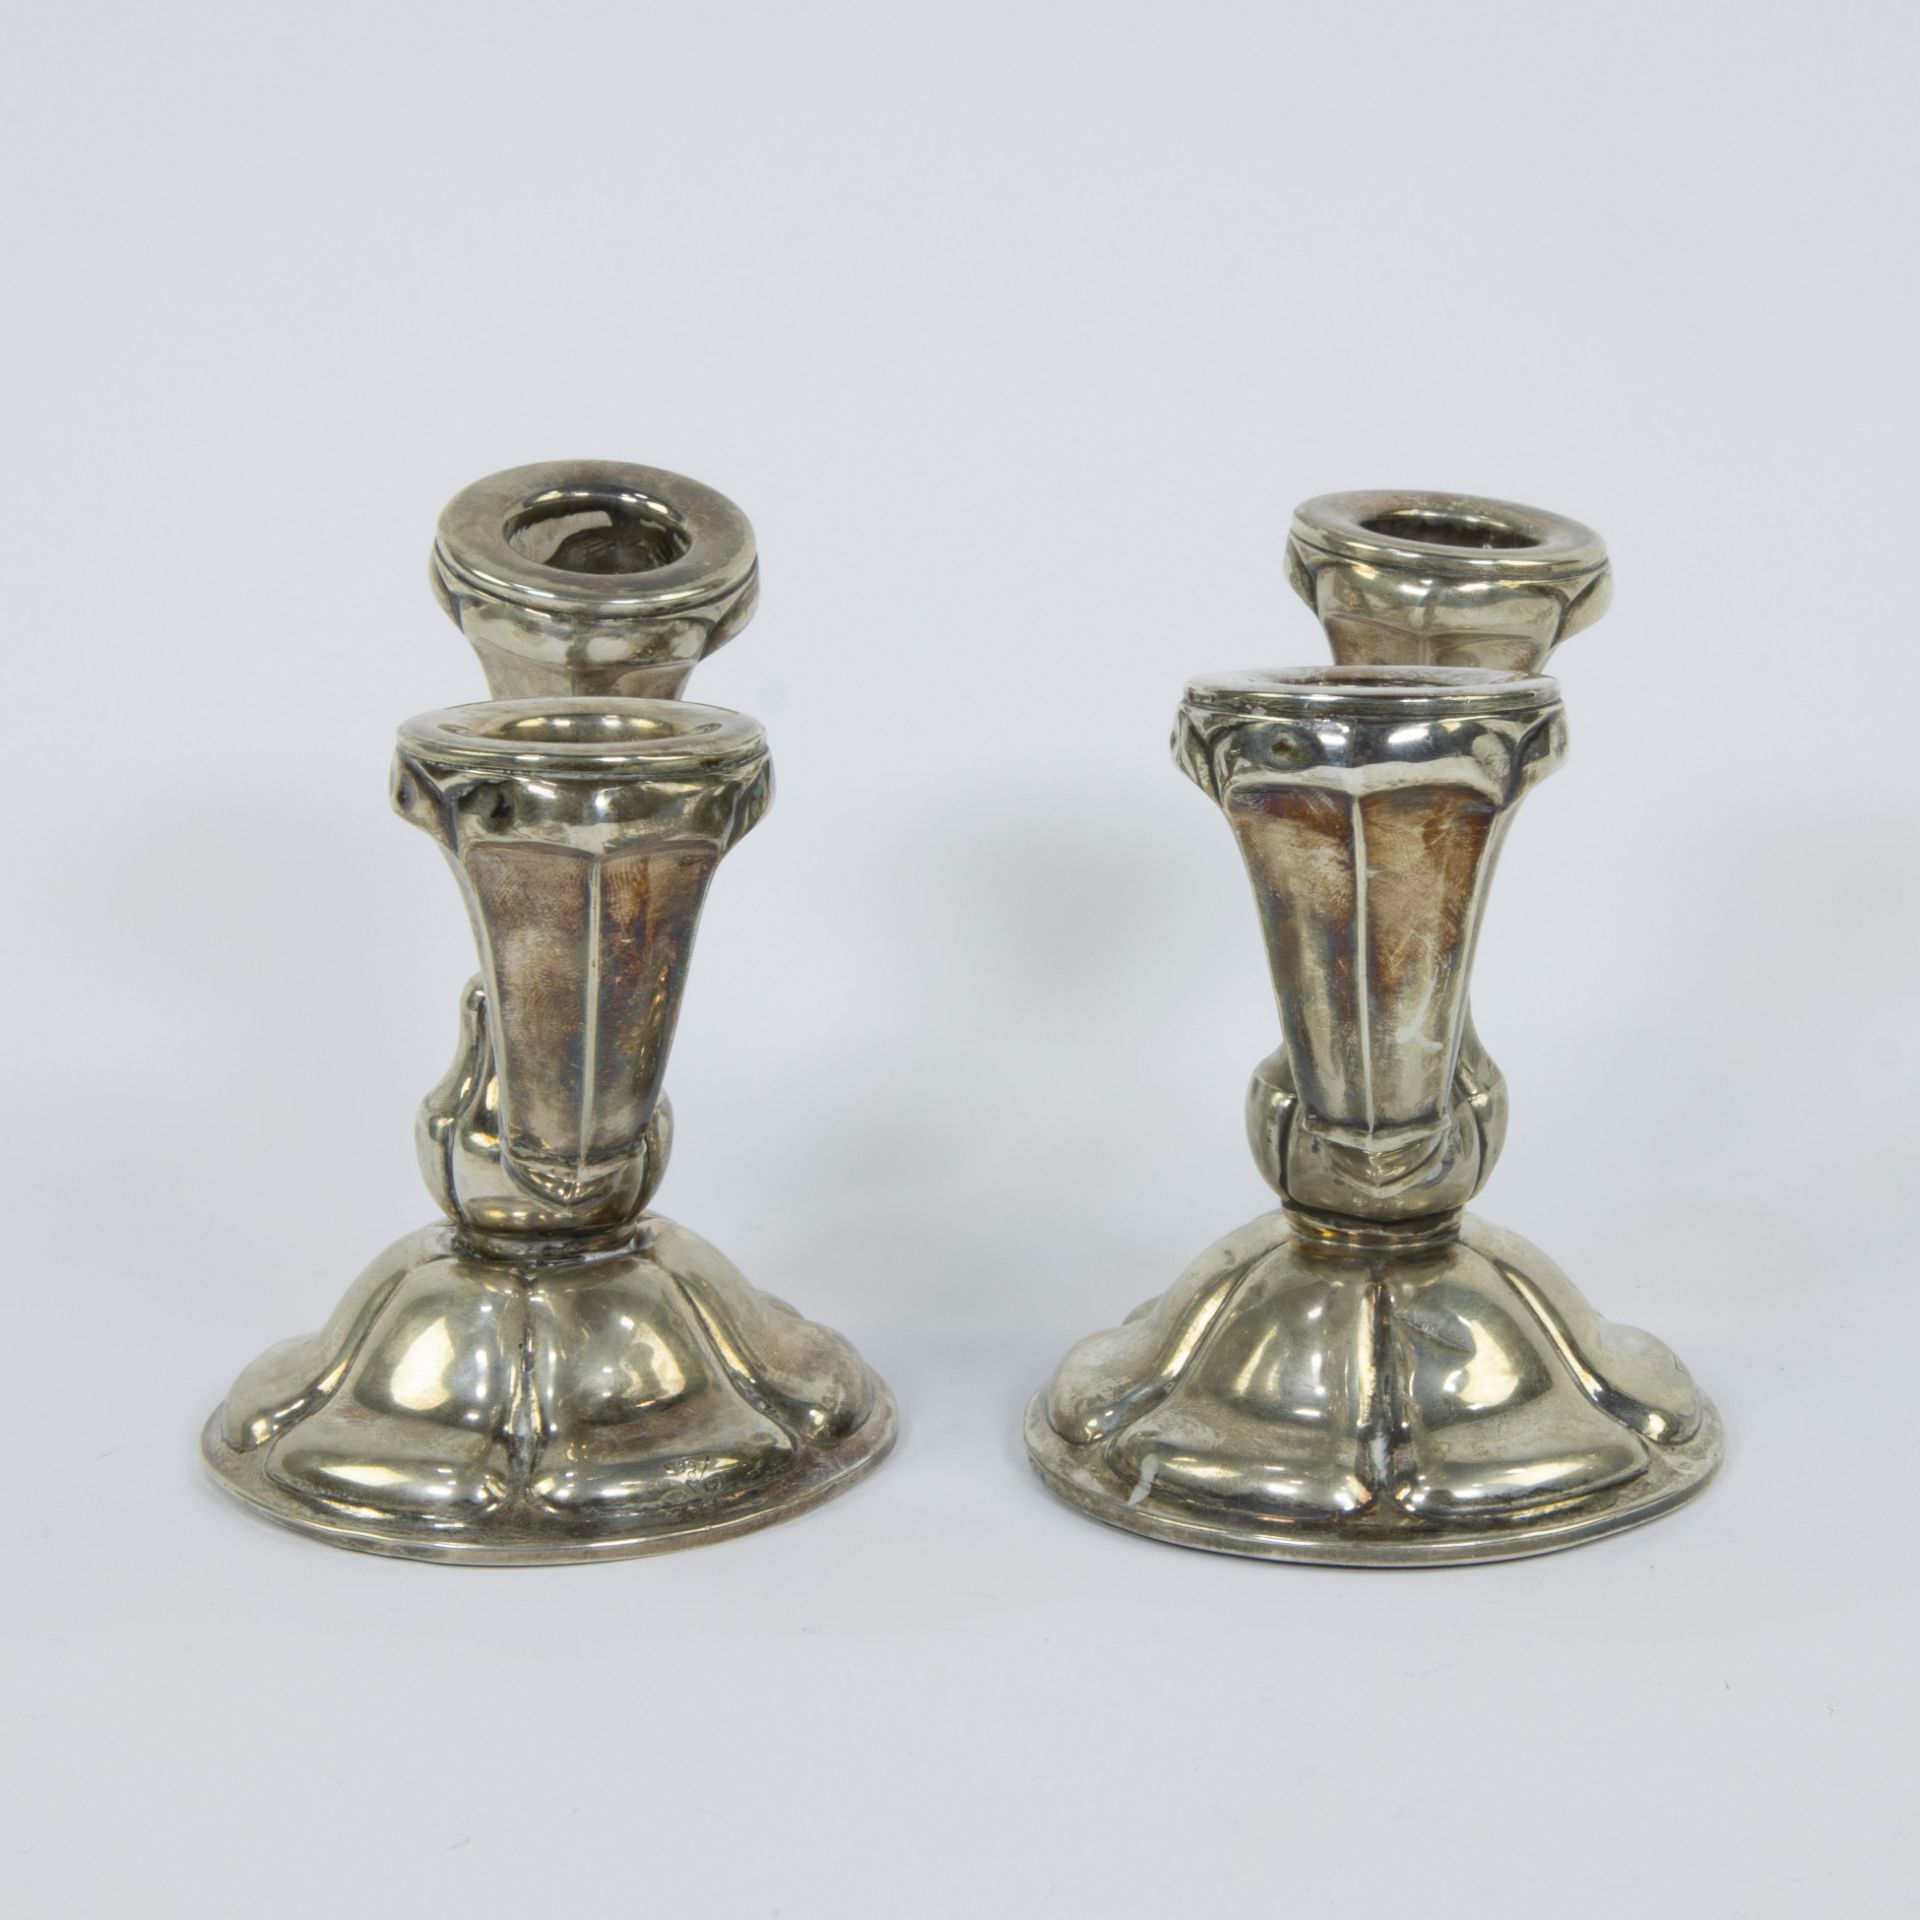 Silver lot, tray (Elite racing 1973) silver 925 and pair of candlesticks silver 830 - Image 5 of 7